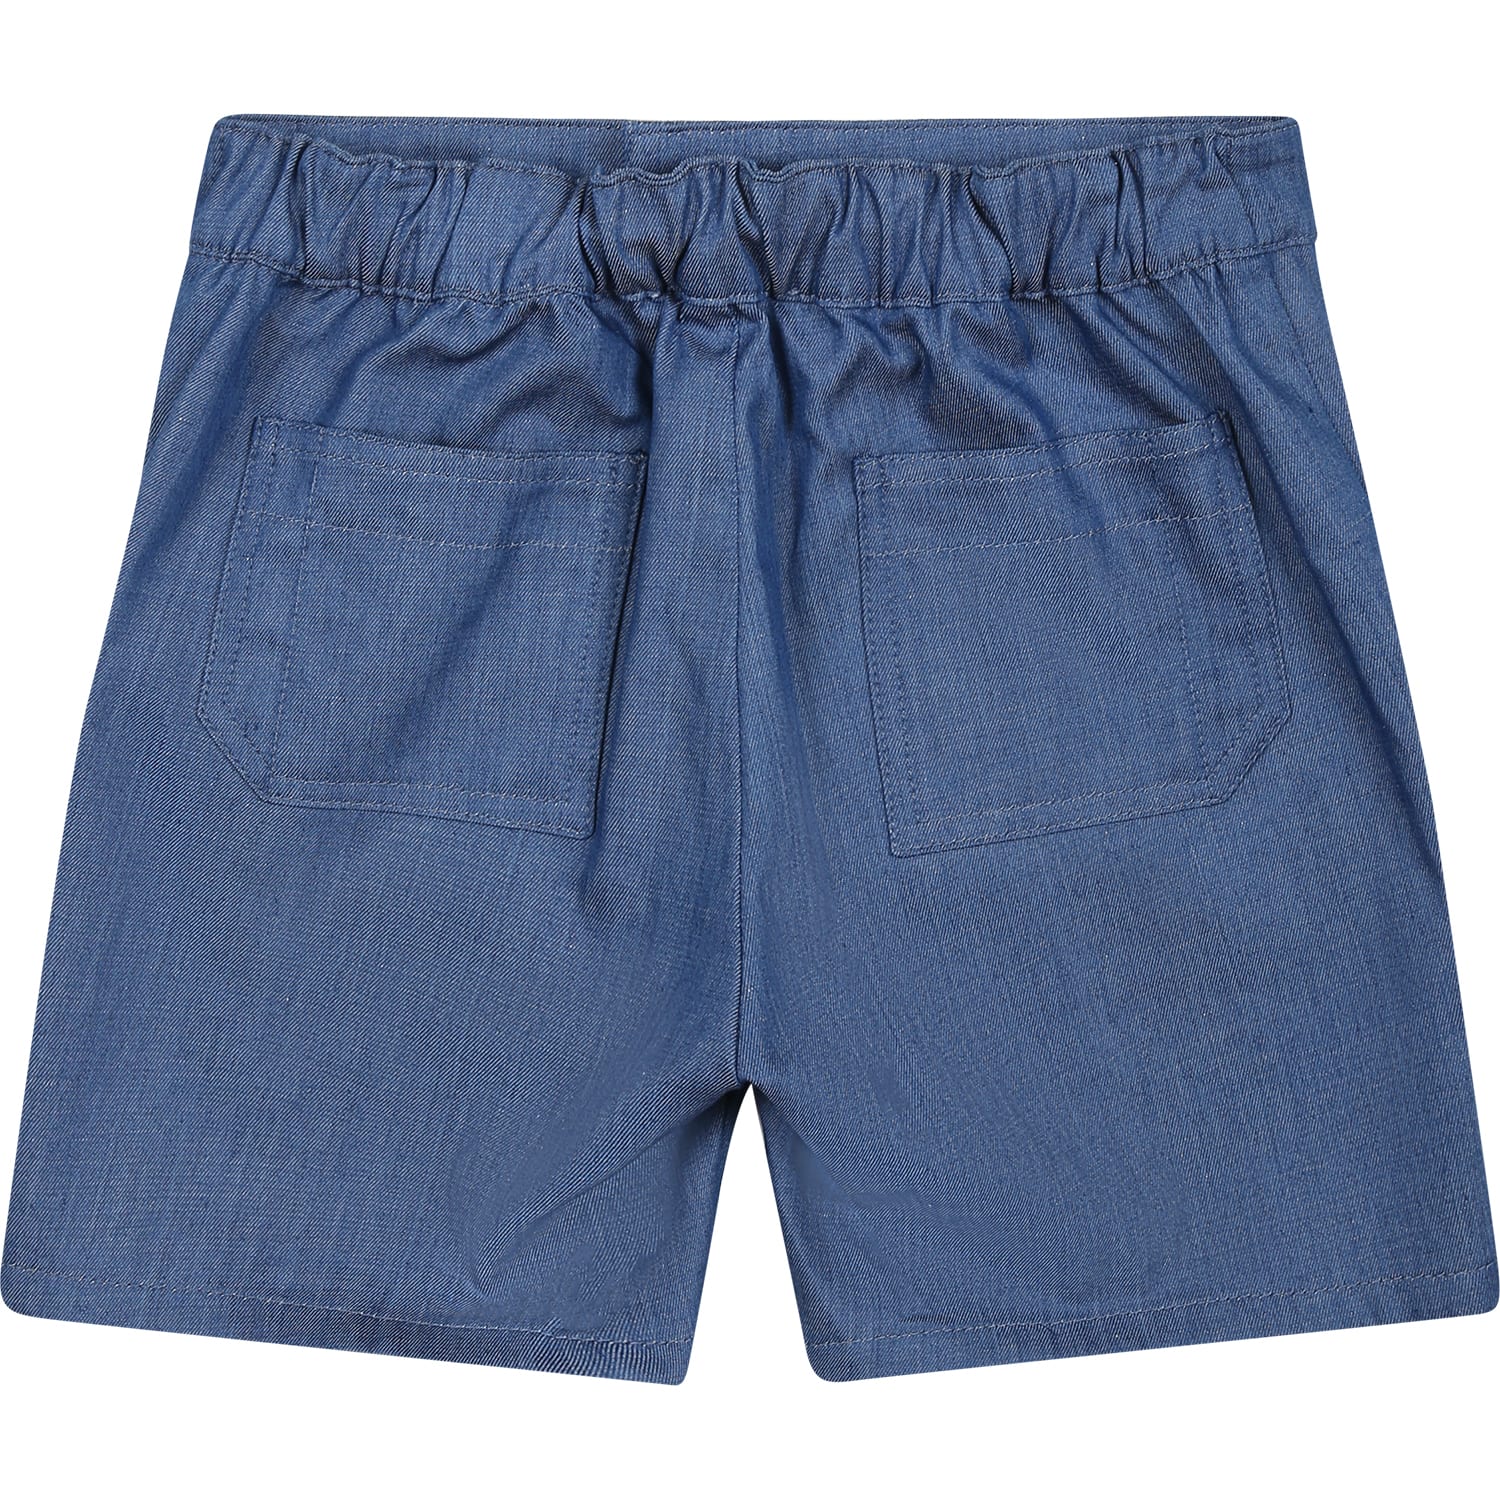 Shop Versace Denim Shorts For Baby Boy With Iconic Medusa